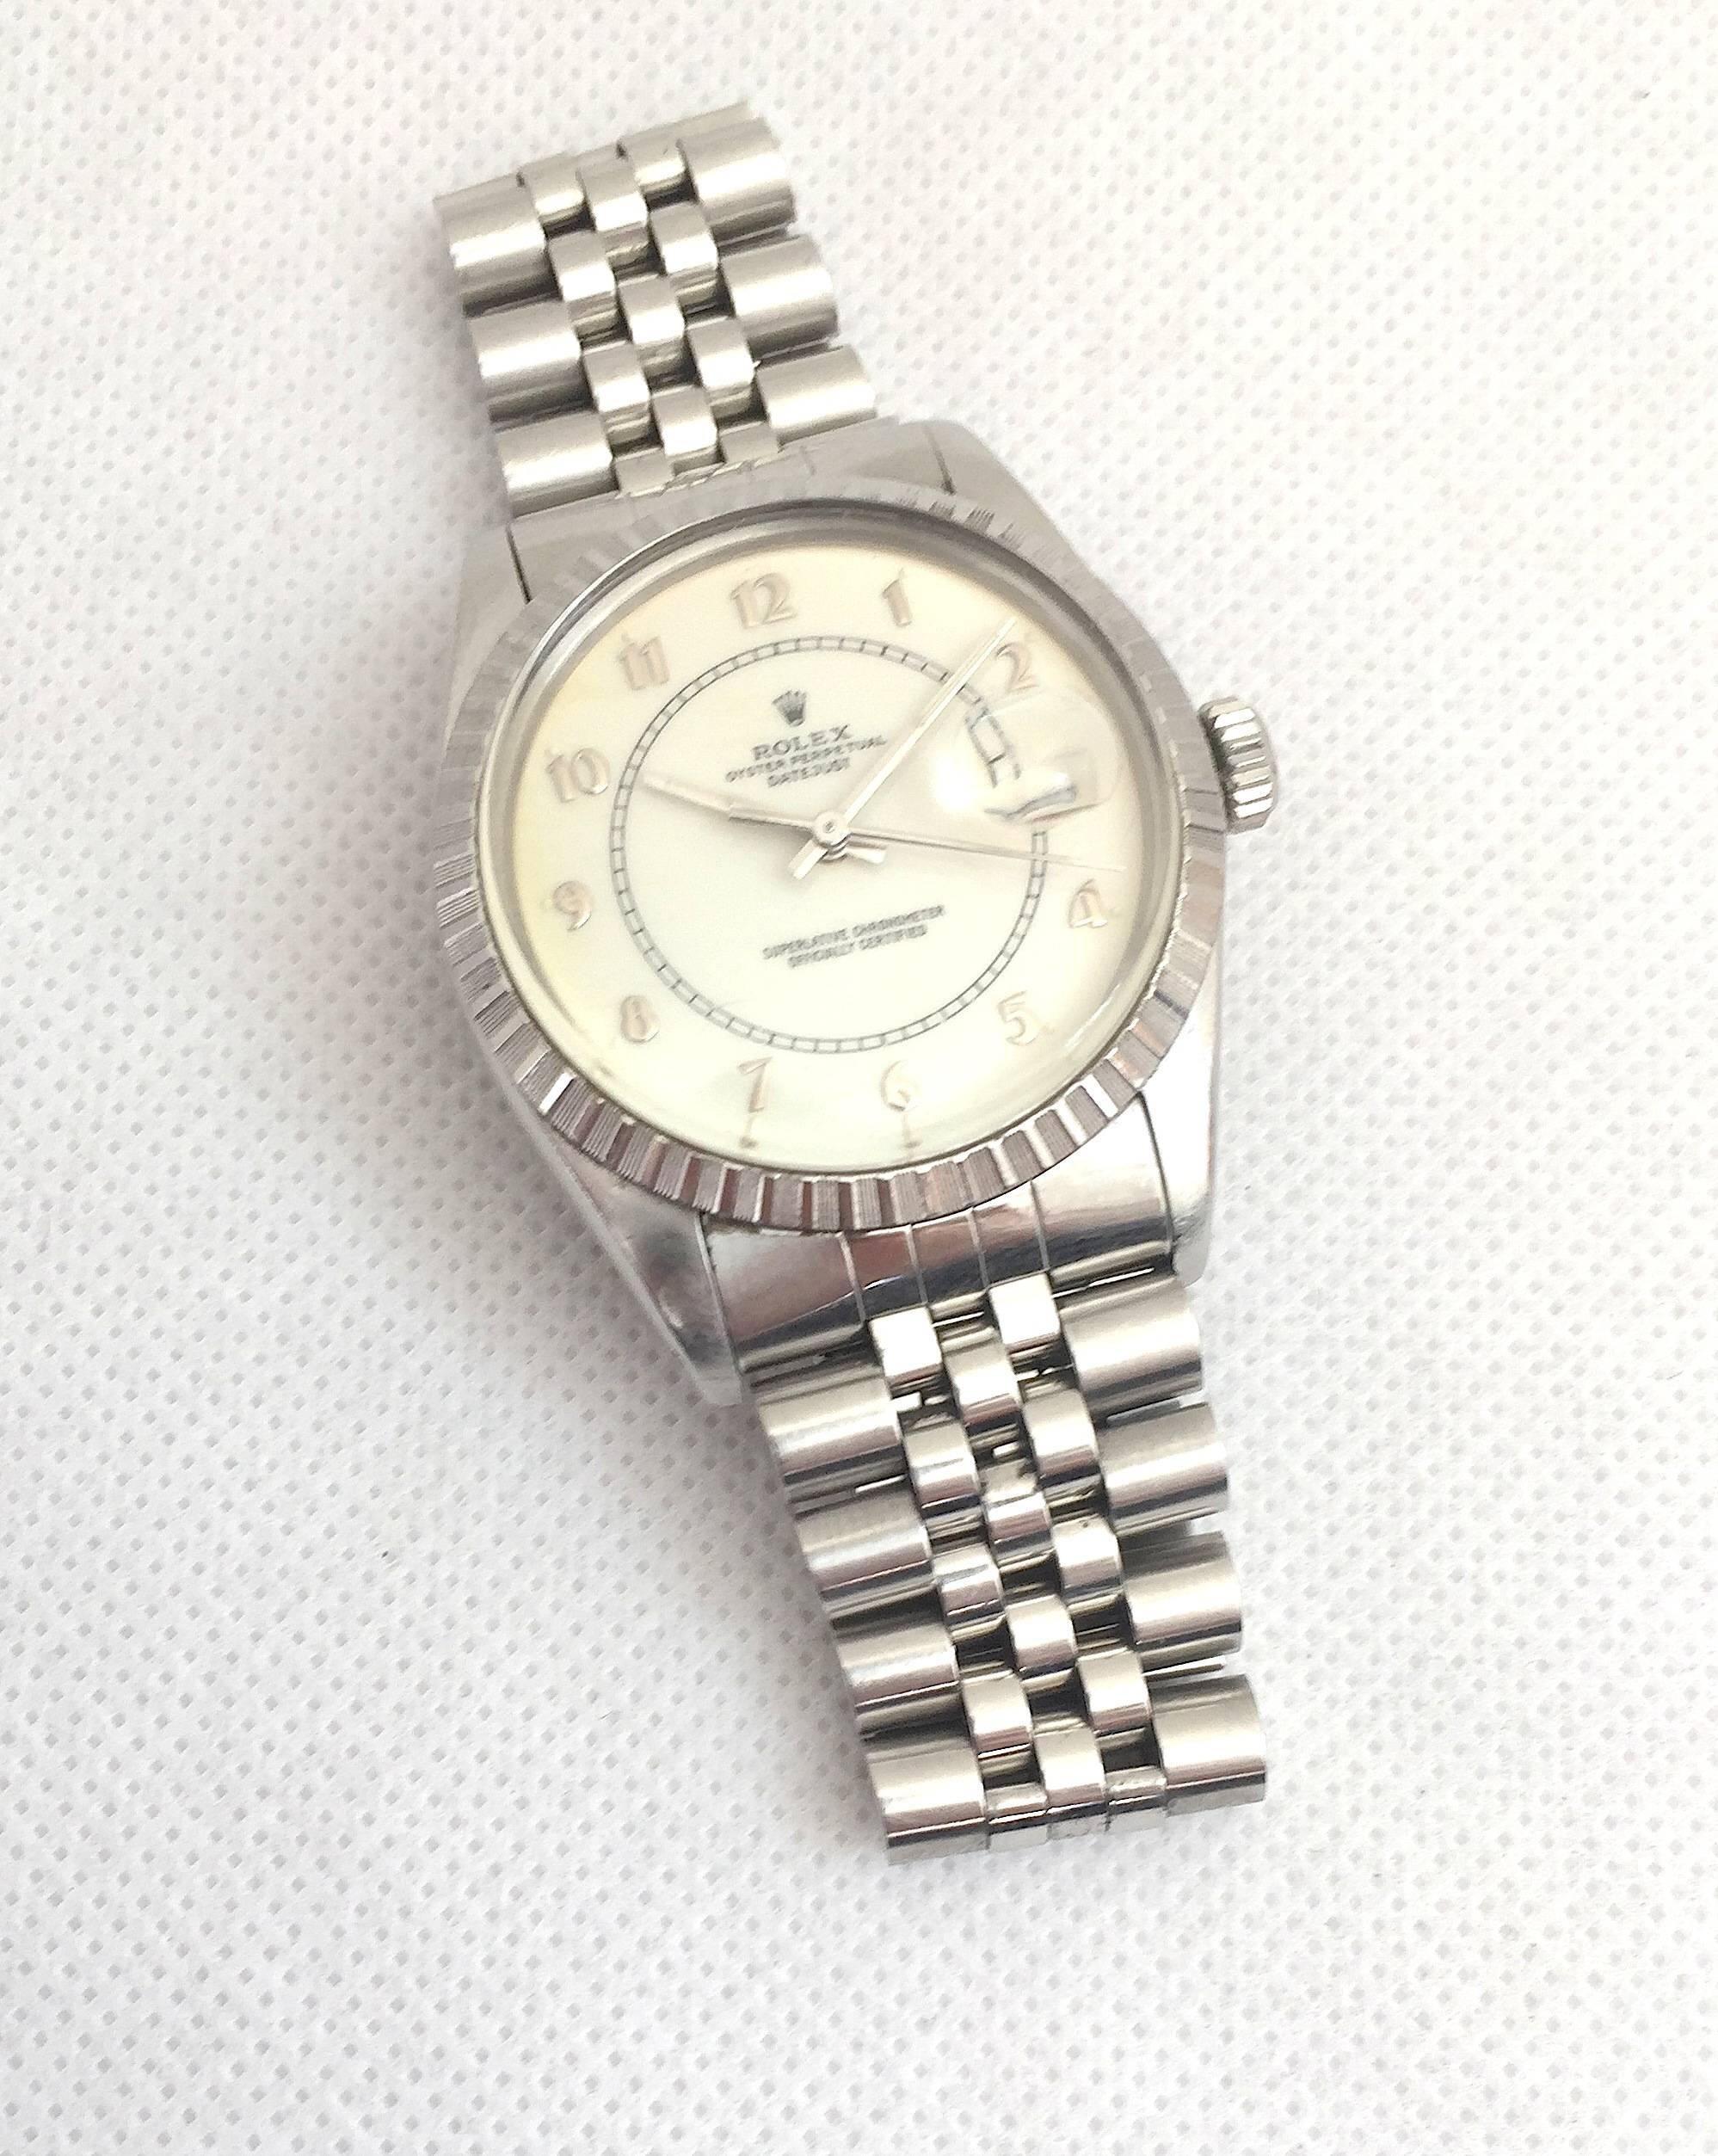 Rolex Stainless Steel Oyster Perpetual Datejust Wristwatch
Factory Enamel 'Boiler Guage' Eggshell Colored Dial with Arabic Hour Numerals
Stainless Steel Engine-Turned Bezel
36mm in size 
Rolex Calibre Base 3035 Automatic Movement
Acrylic